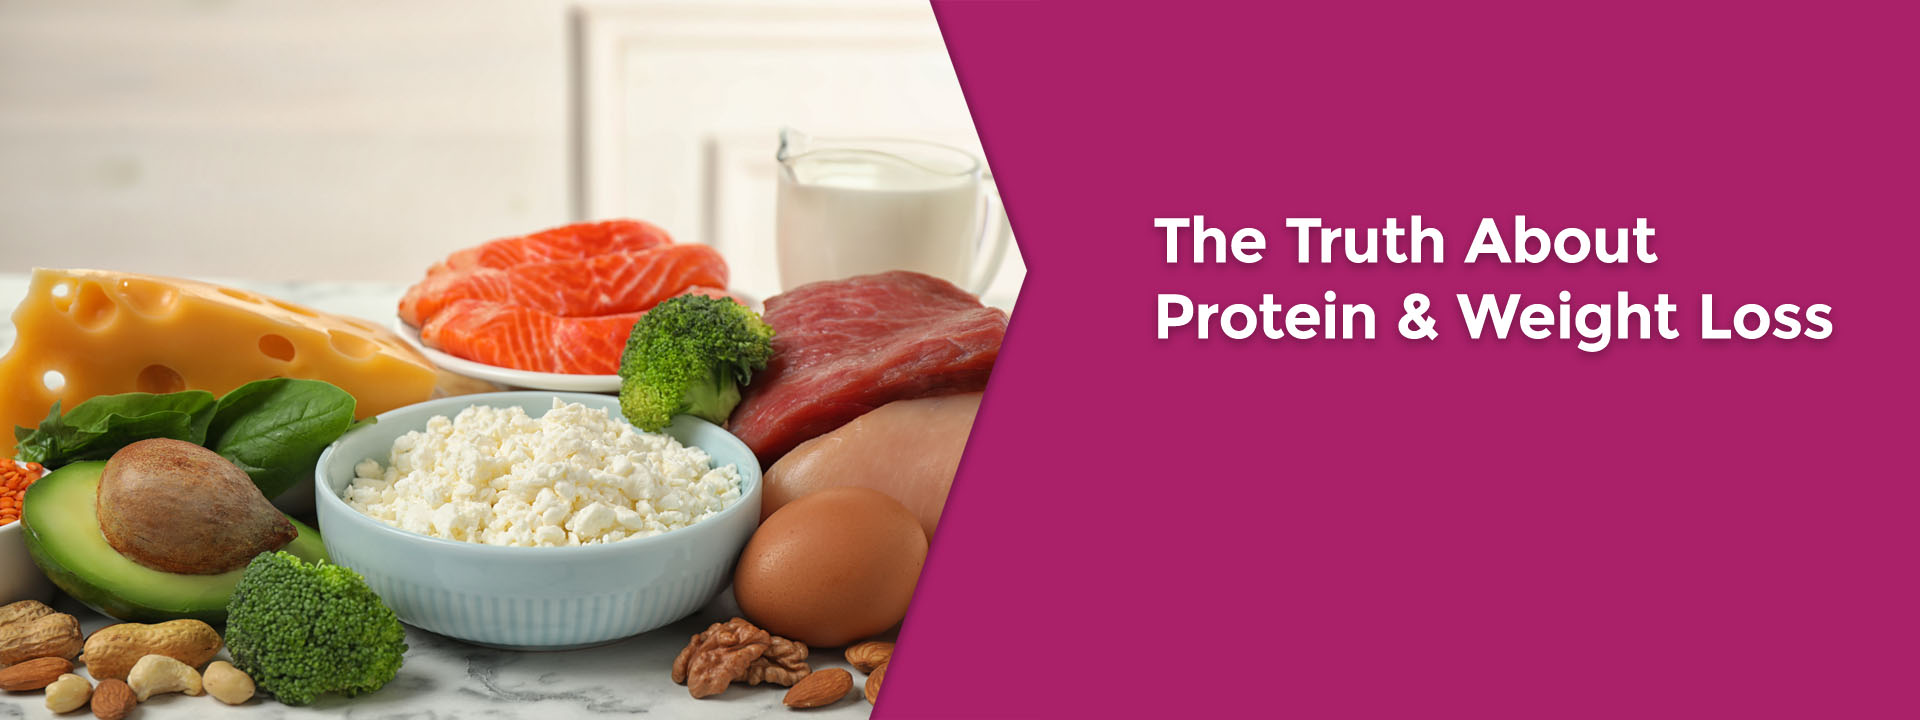 The Truth About Protein and Weight Loss